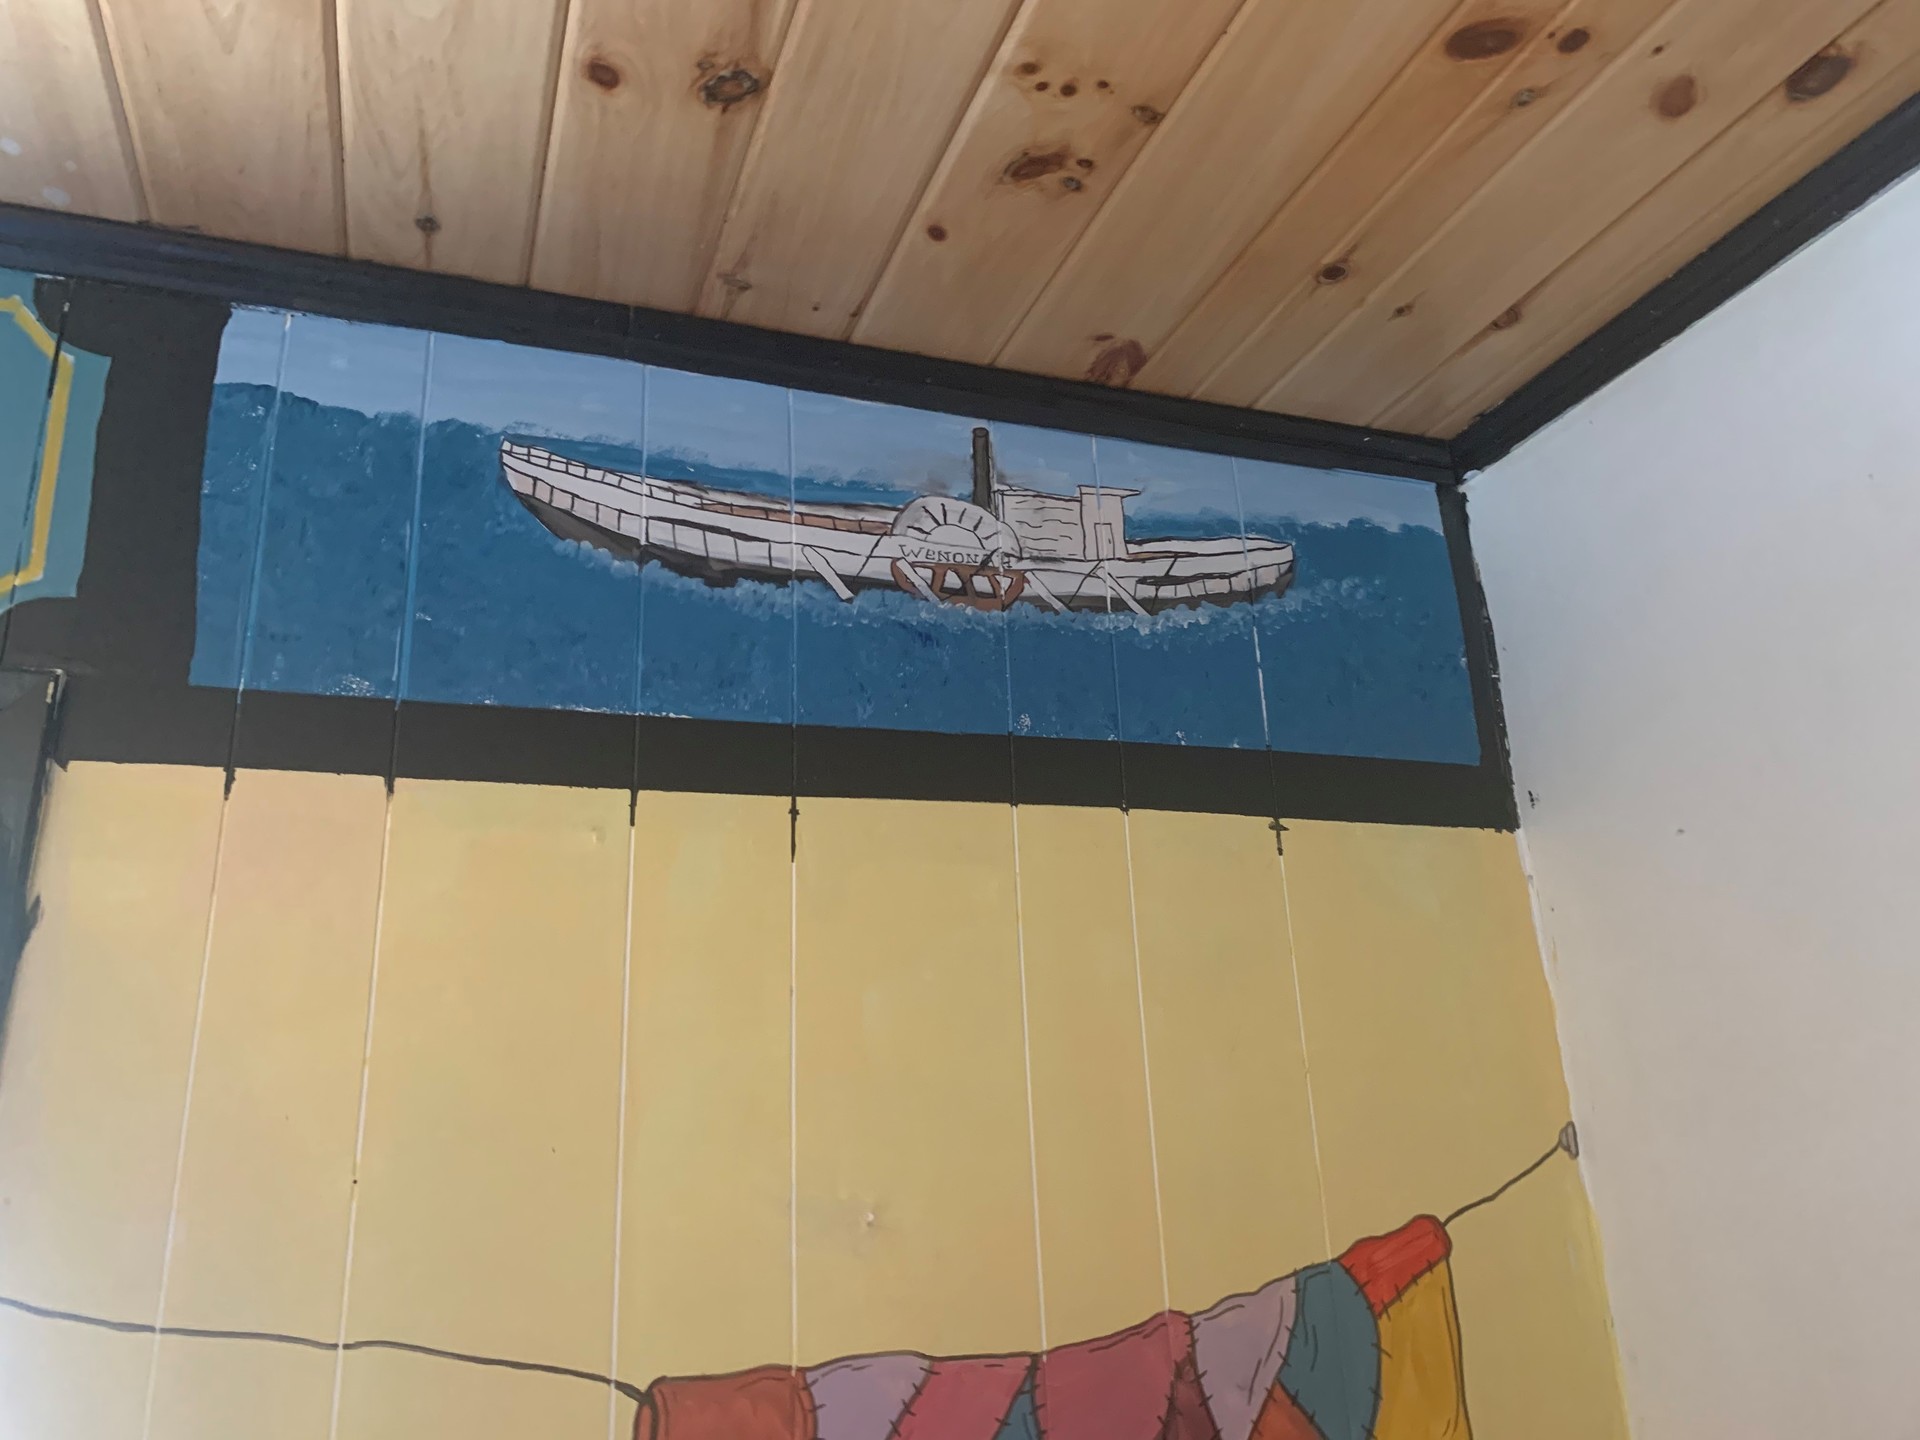 boat painted as part of the mural